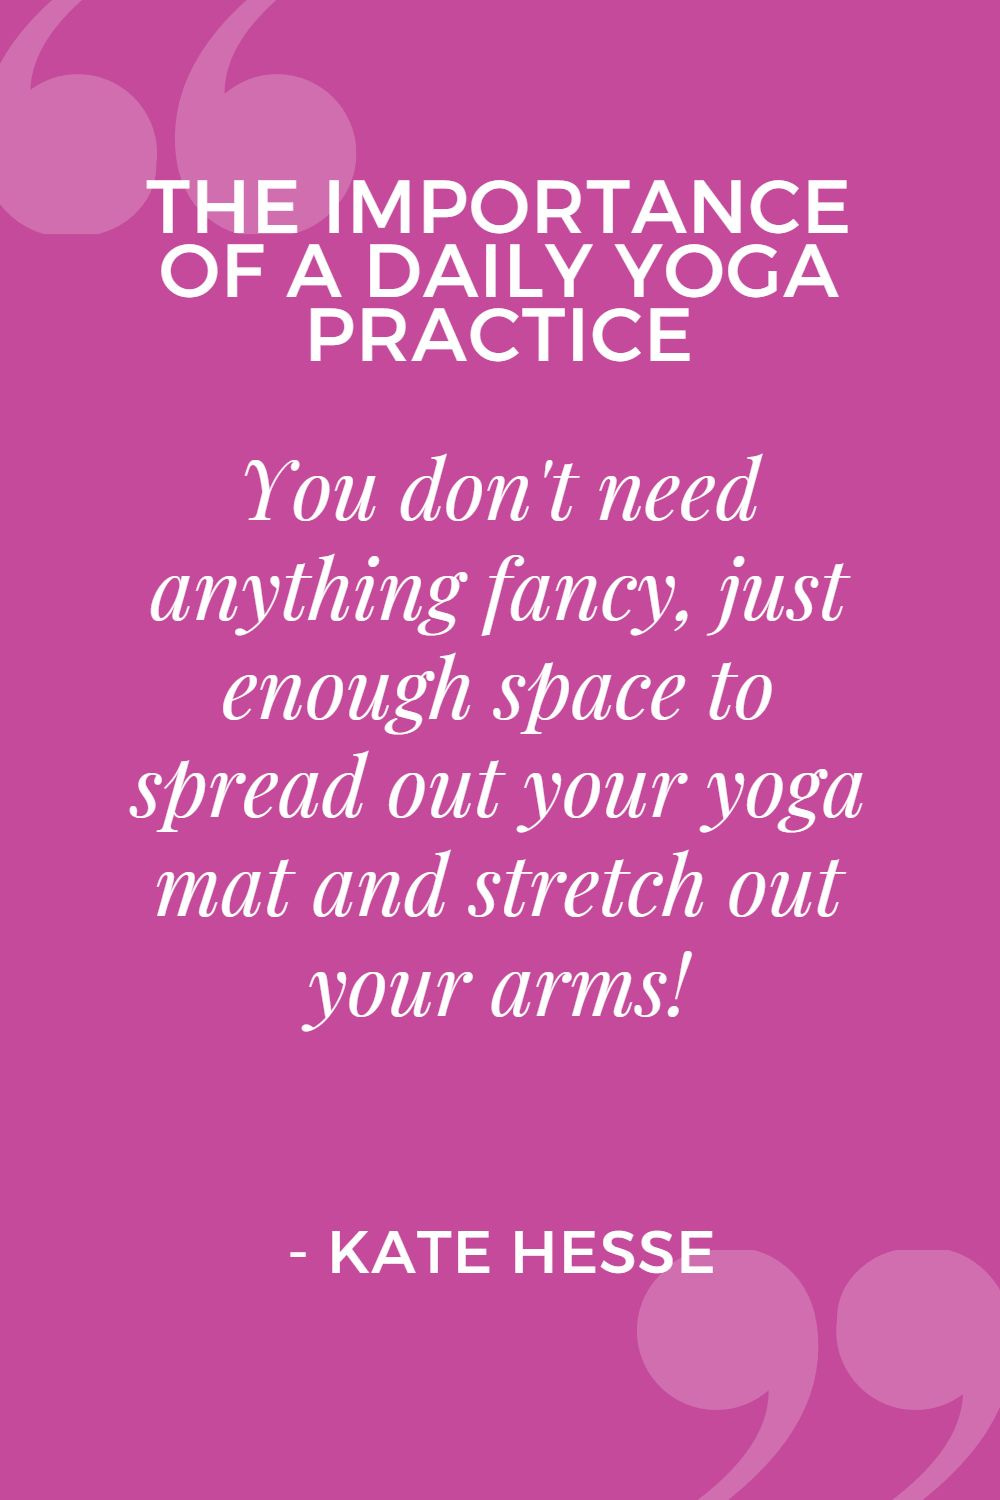 You don't need anything fancy, just enough space to spread out your yoga mat and stretch out your arms!